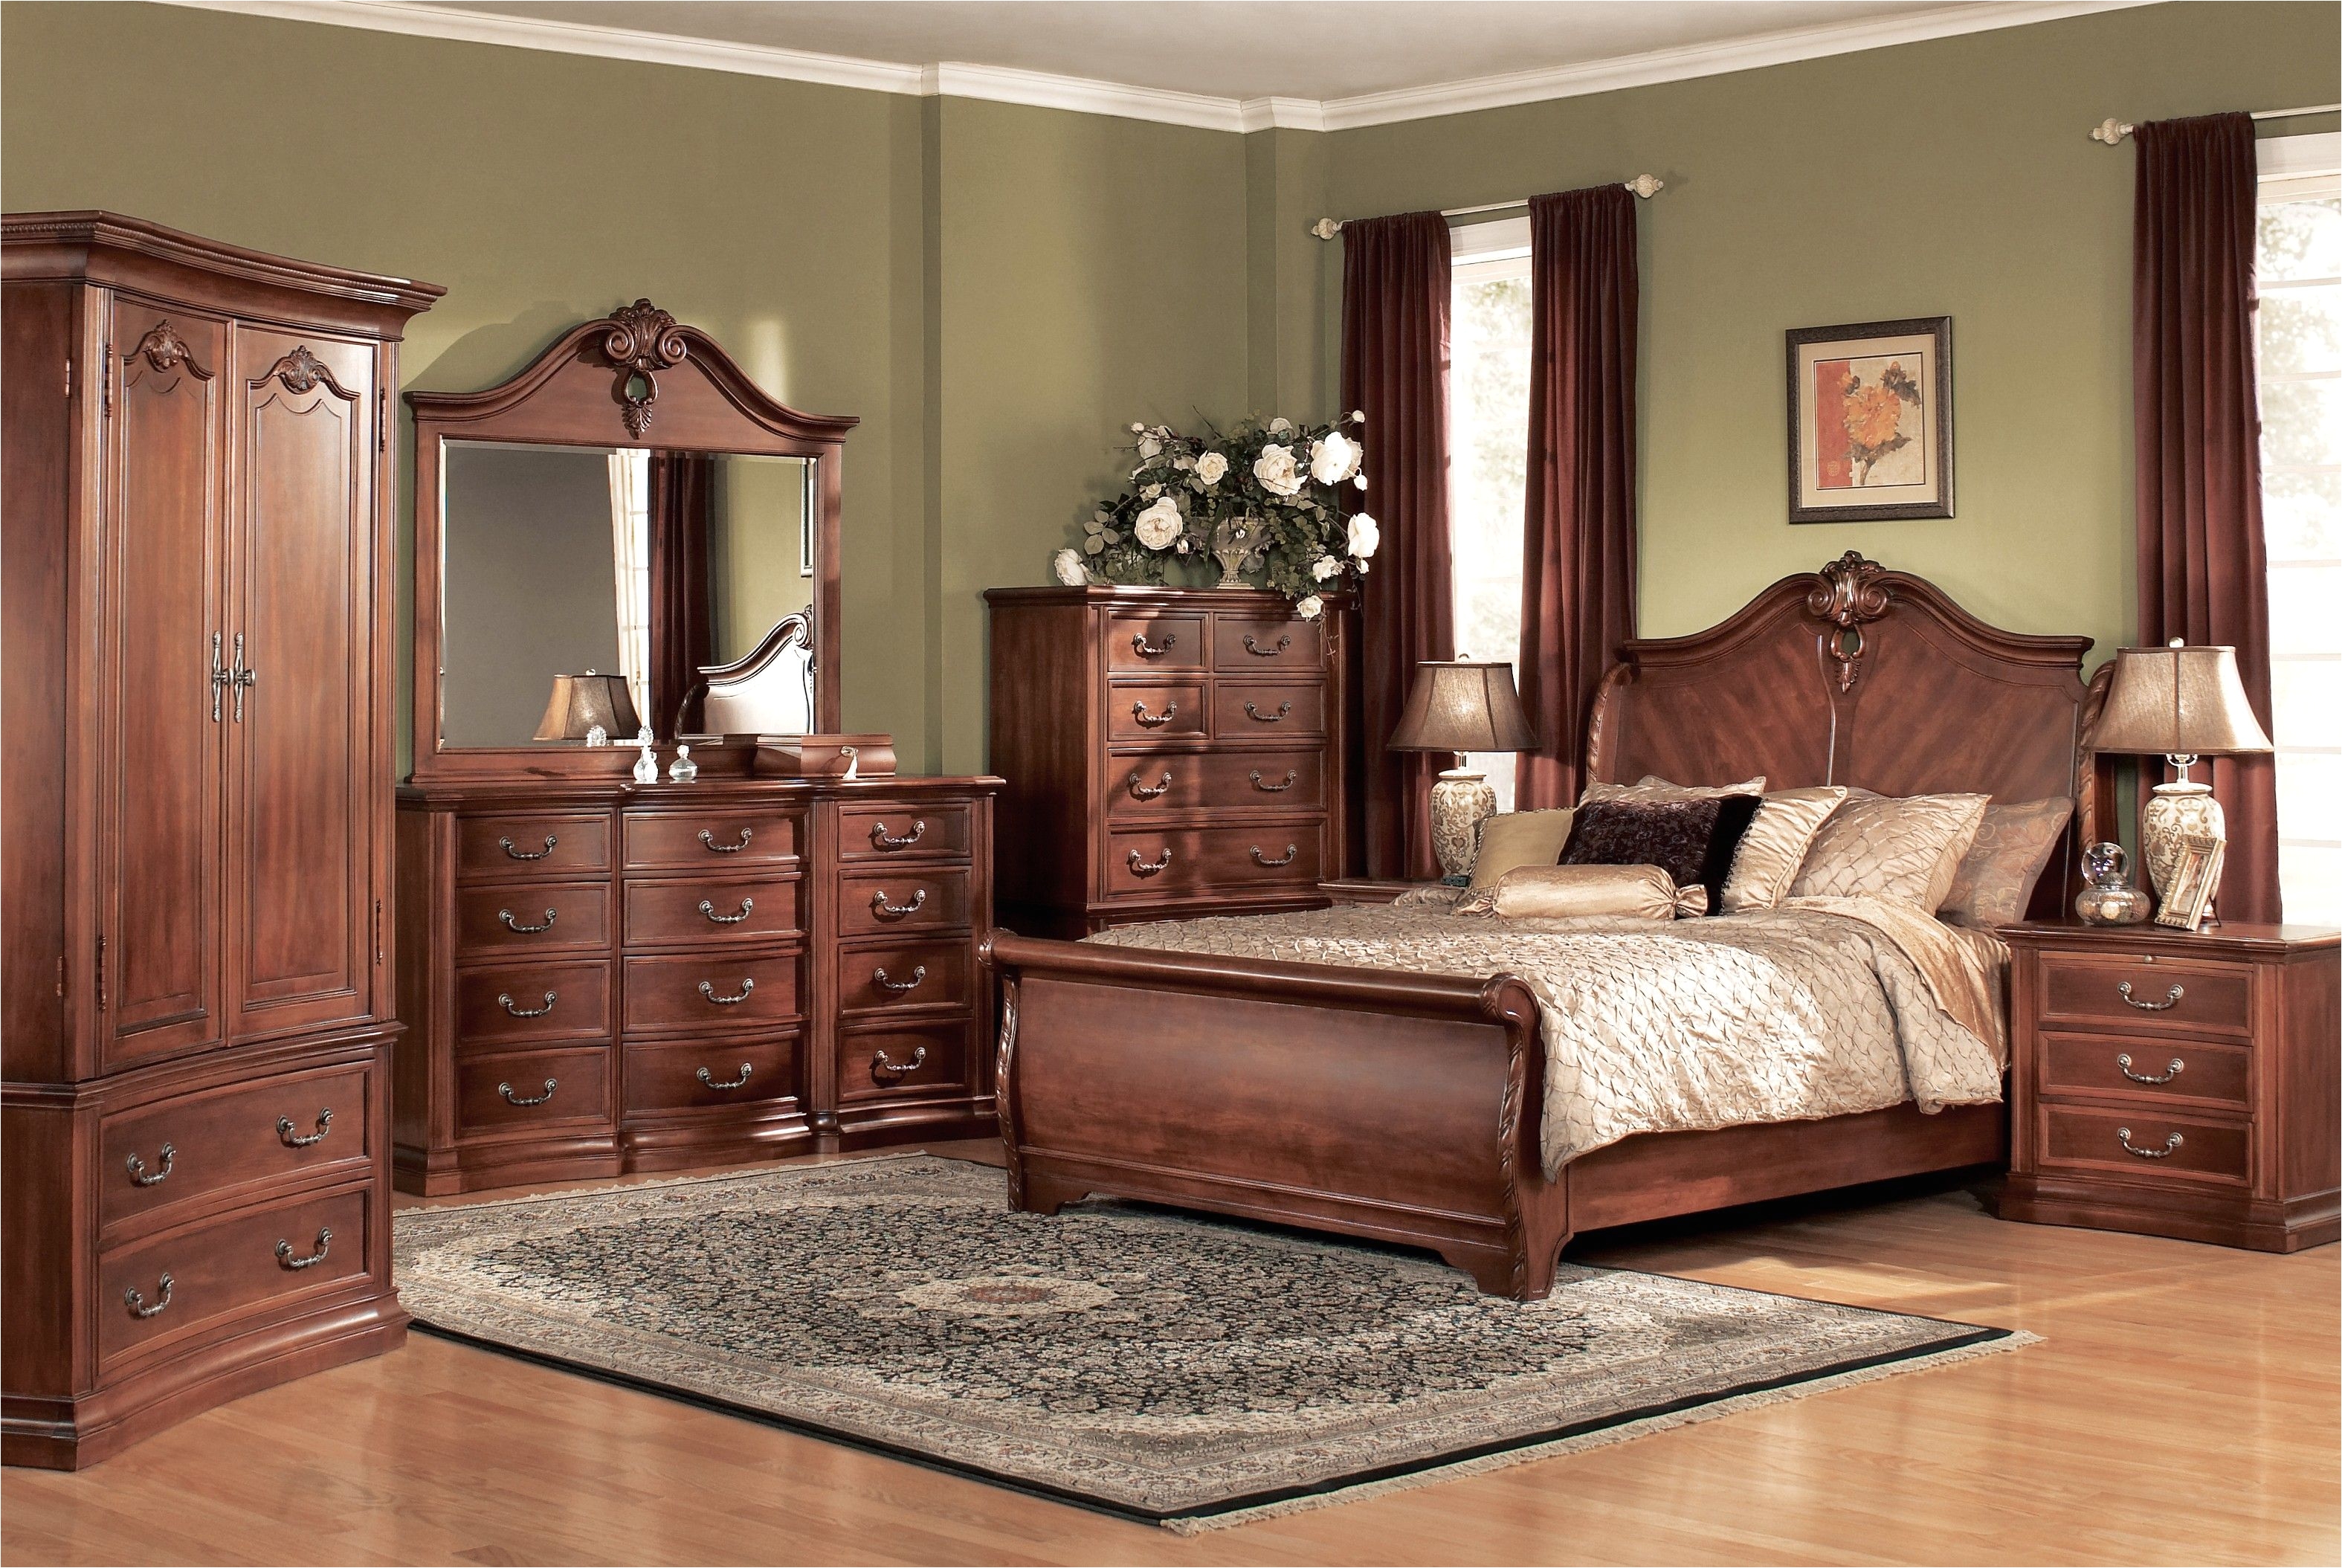 greatest decorate traditional bedroom design ideas with wardrobe and wooden floors beautiful traditional bedroom design ideas